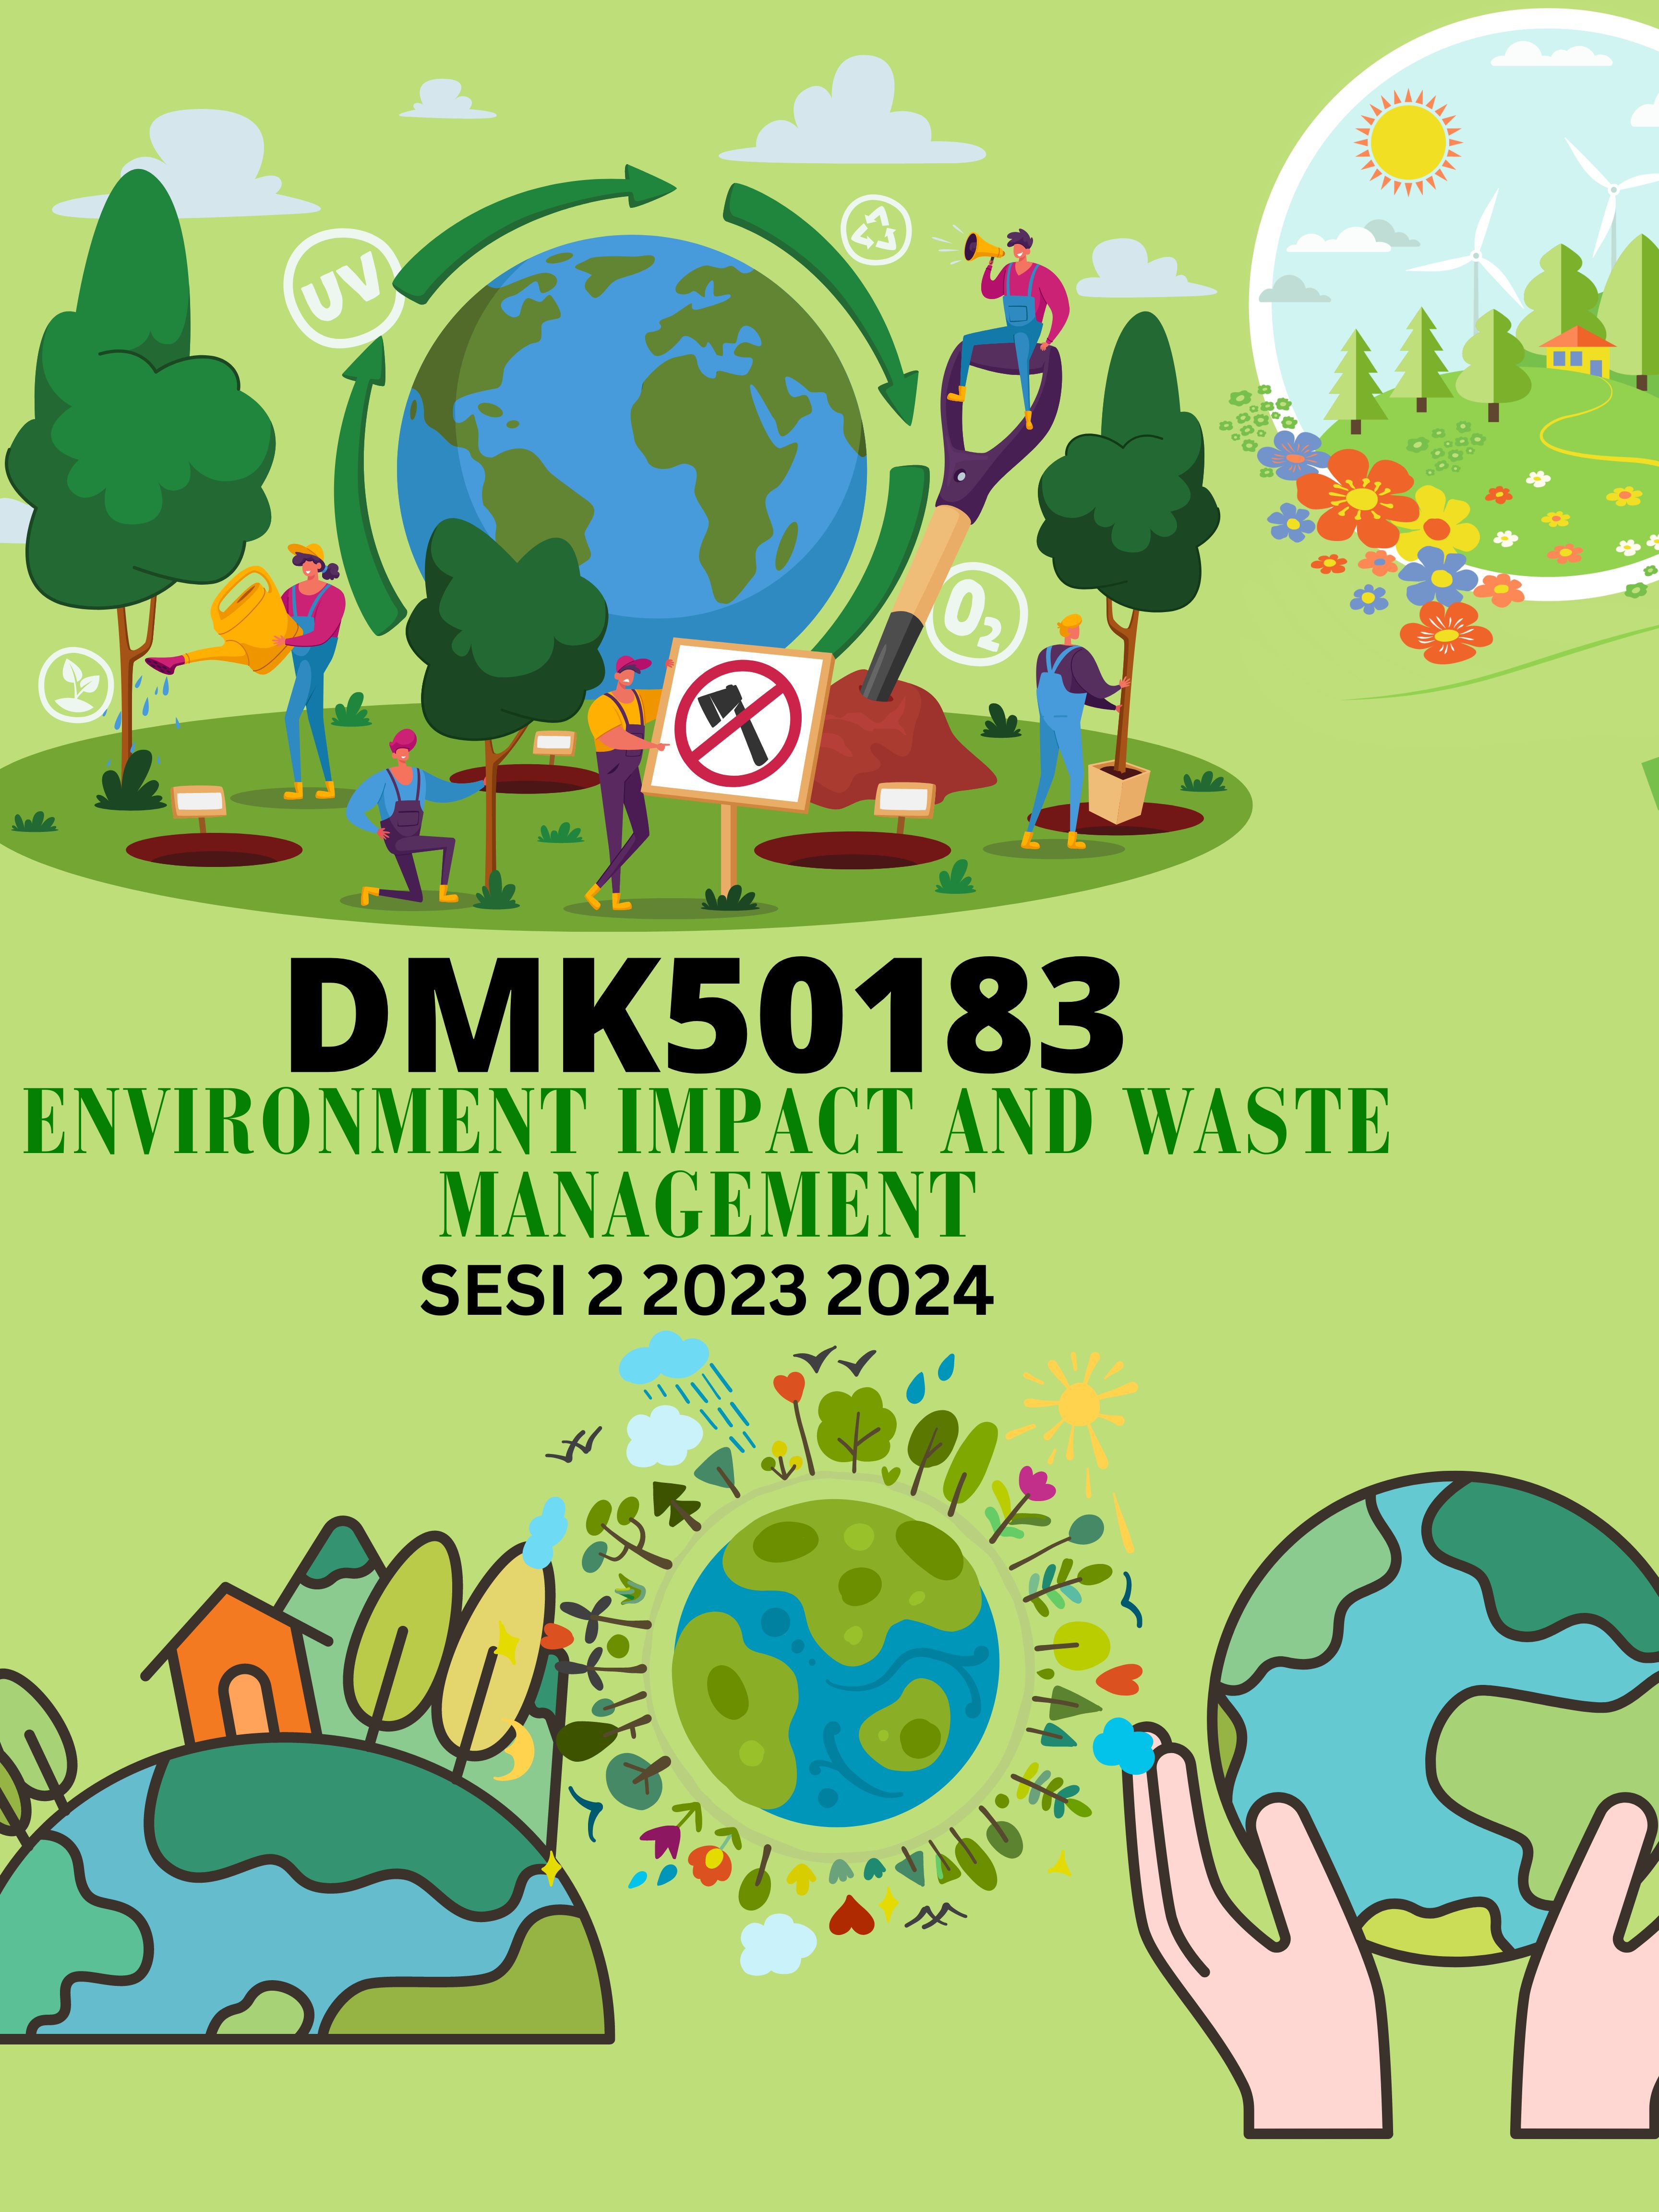 DMK50183 ENVIRONMENTAL IMPACT AND WASTE MANAGEMENT